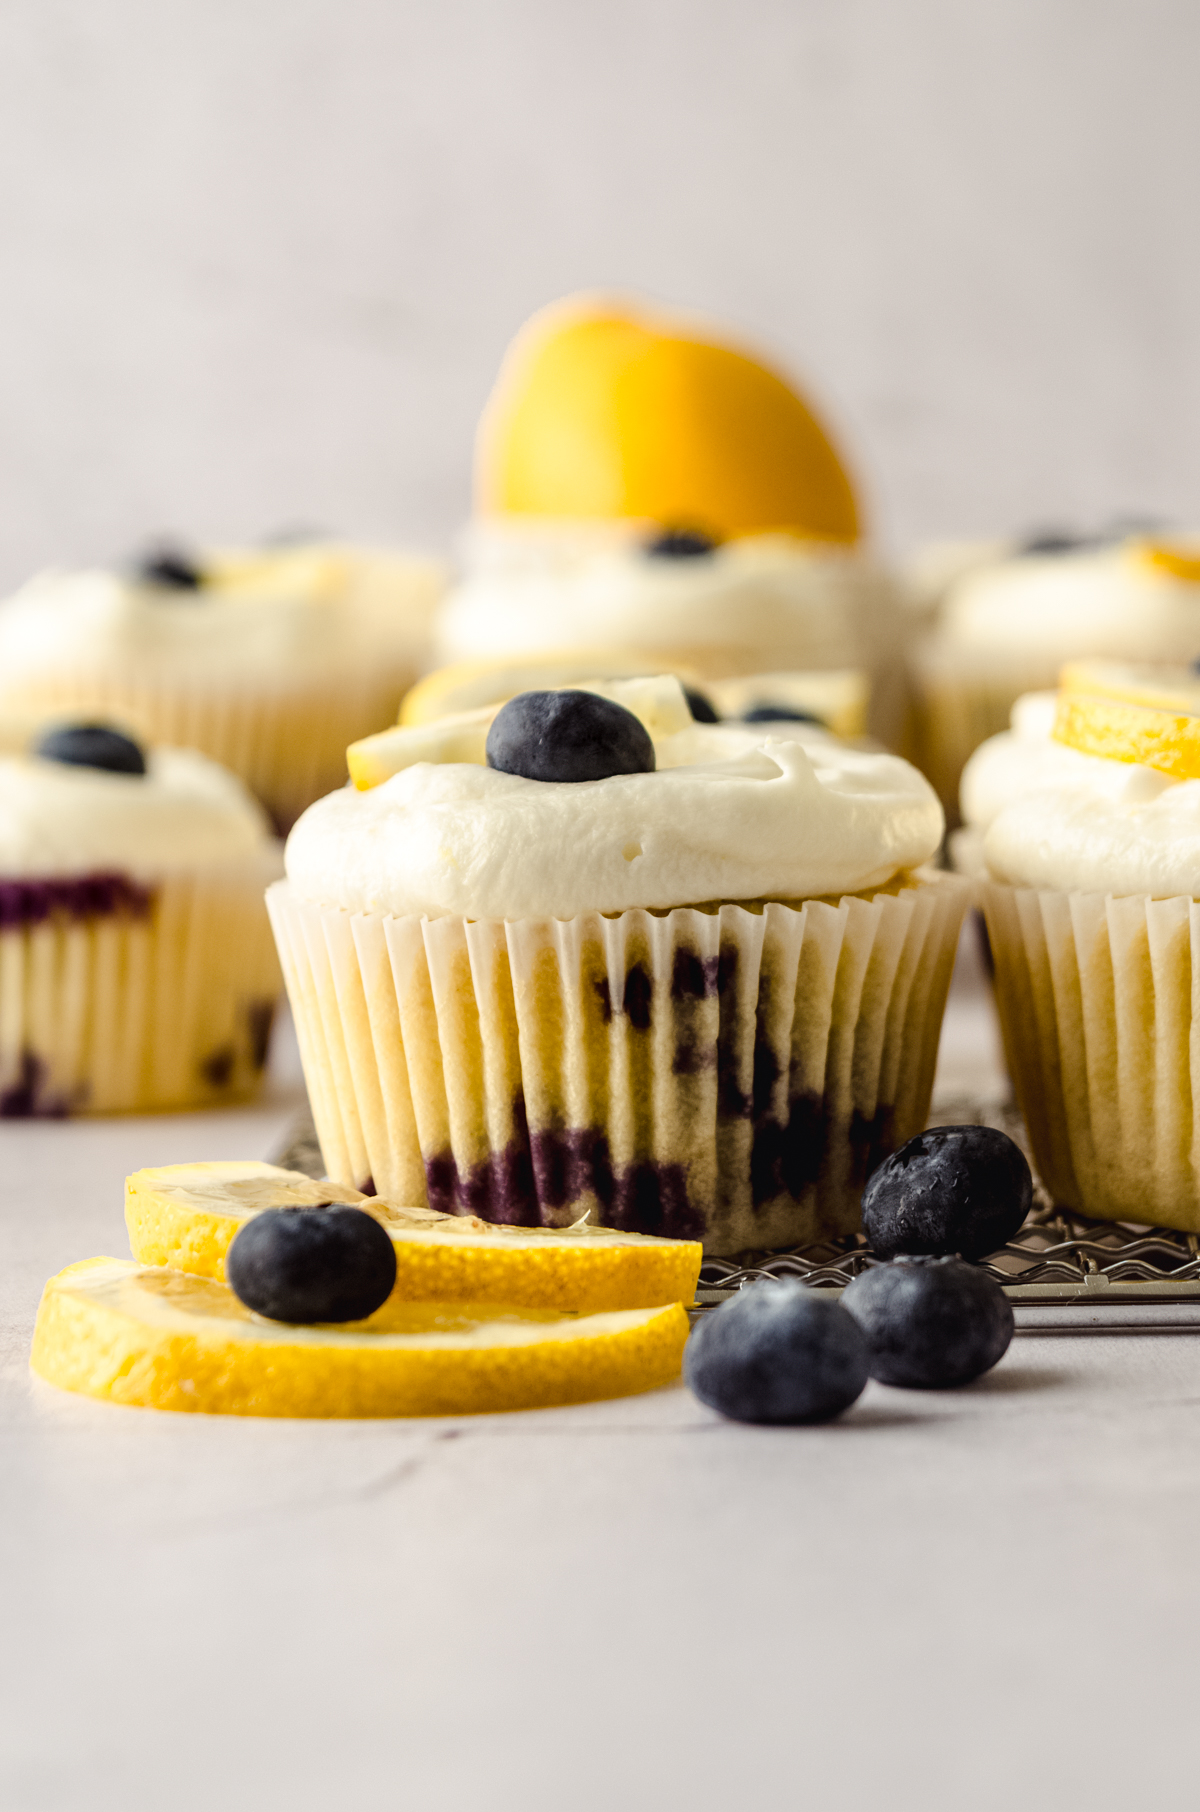 A lemon blueberry cupcake sitting on a metal grater with a blueberry on top and a lemon slice on top and beside it.